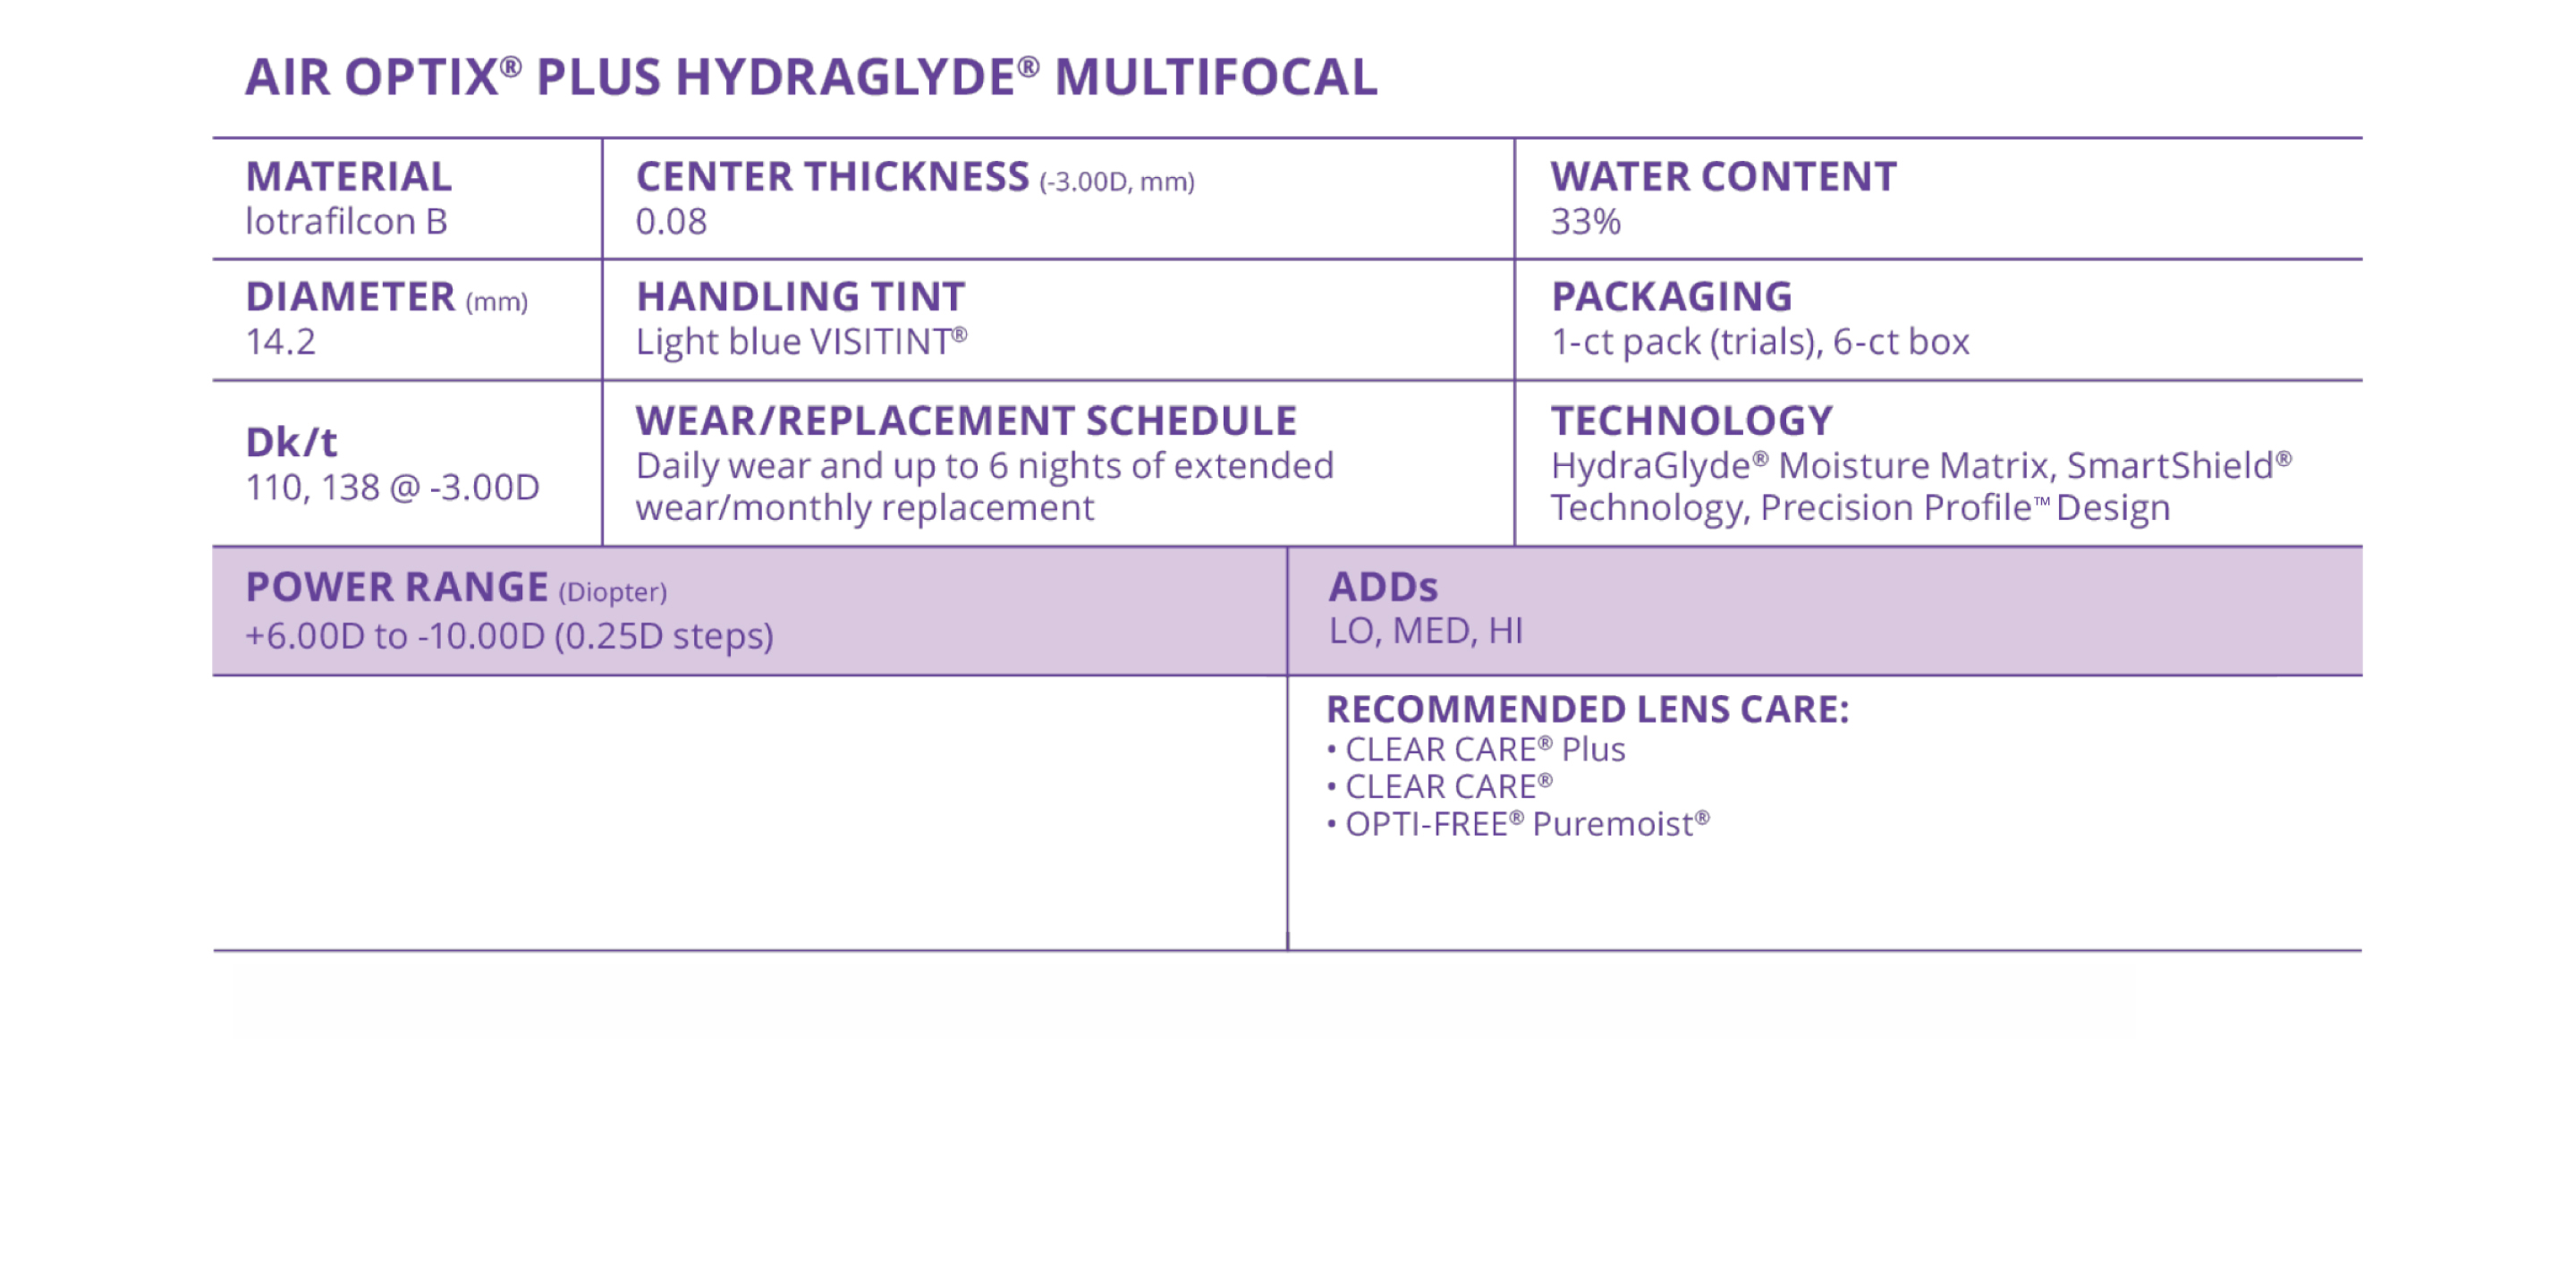 AIR OPTIX® plus HydraGlyde® multifocal Contact Lenses  Product Information